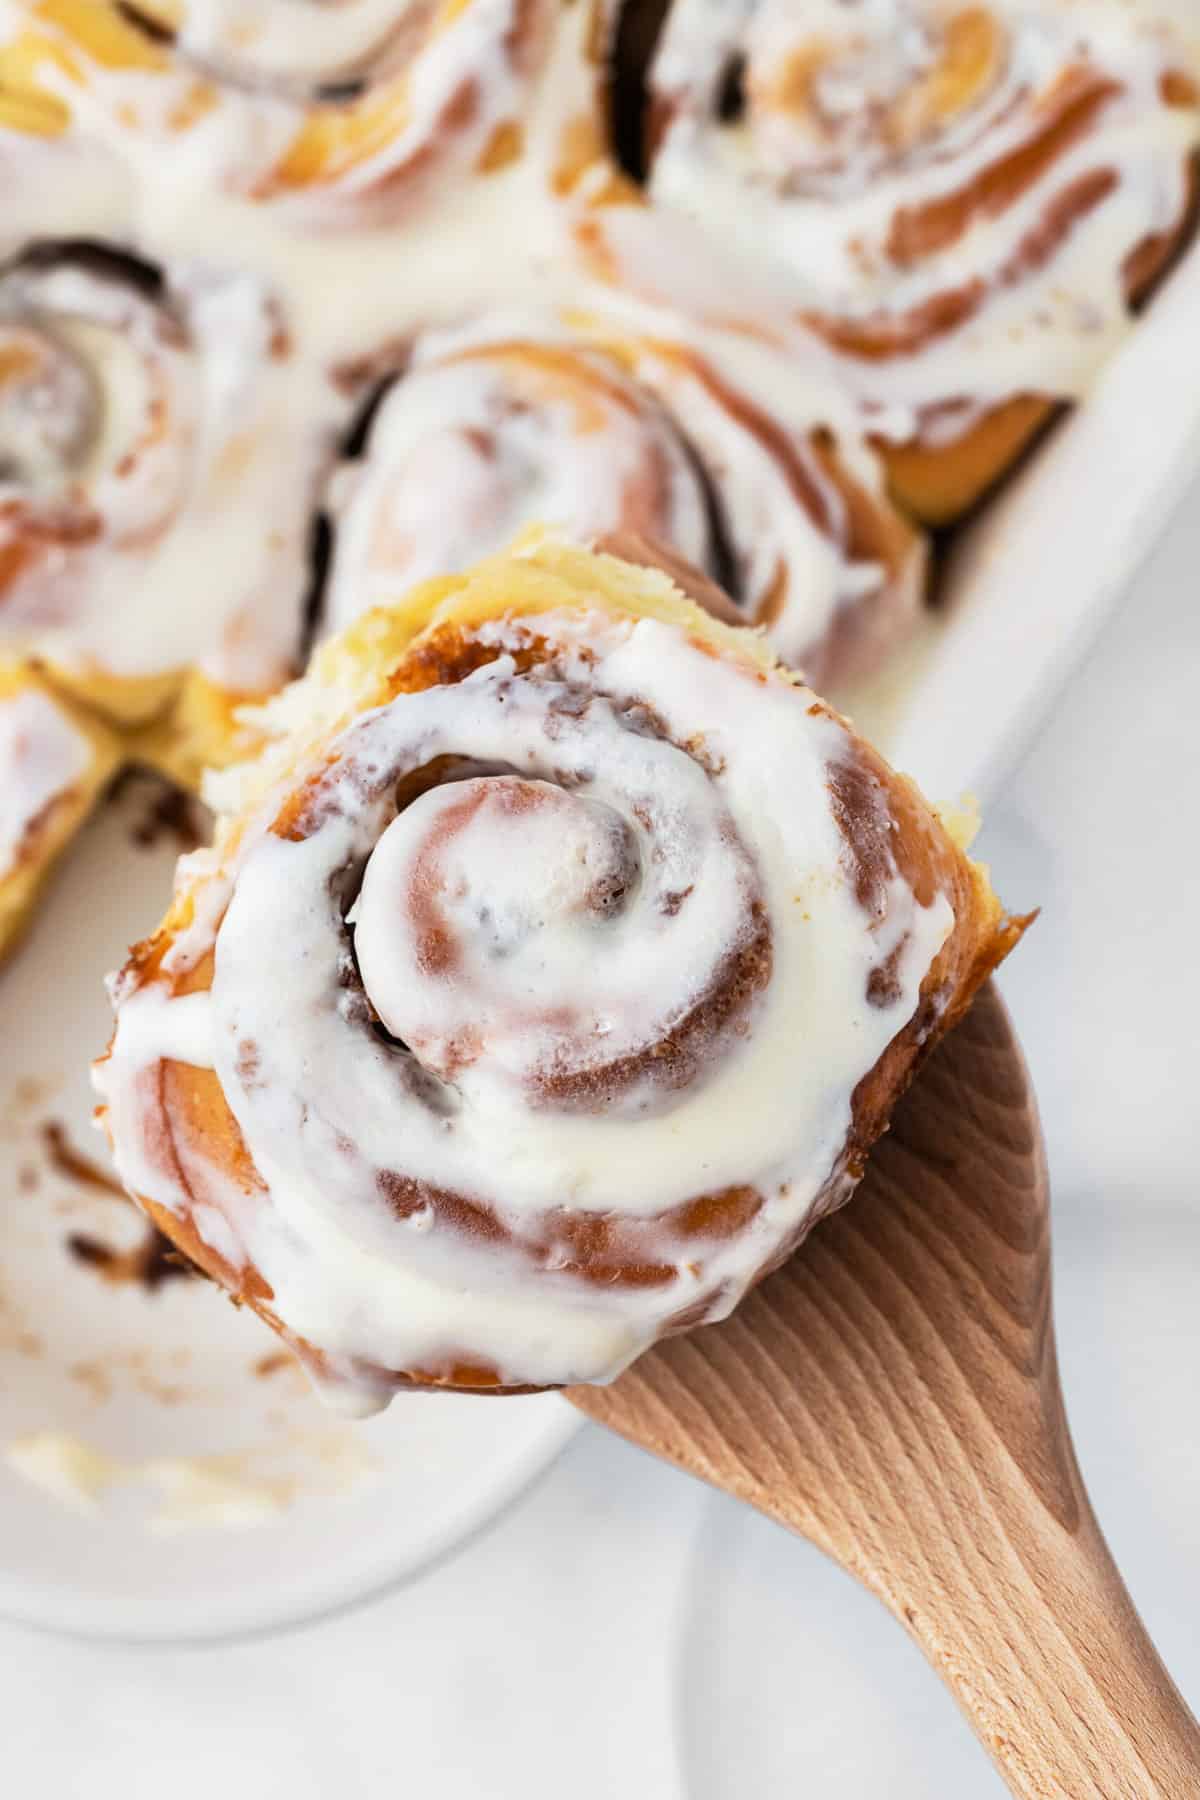 A single cinnamon roll is being lifted by a wooden spoon.